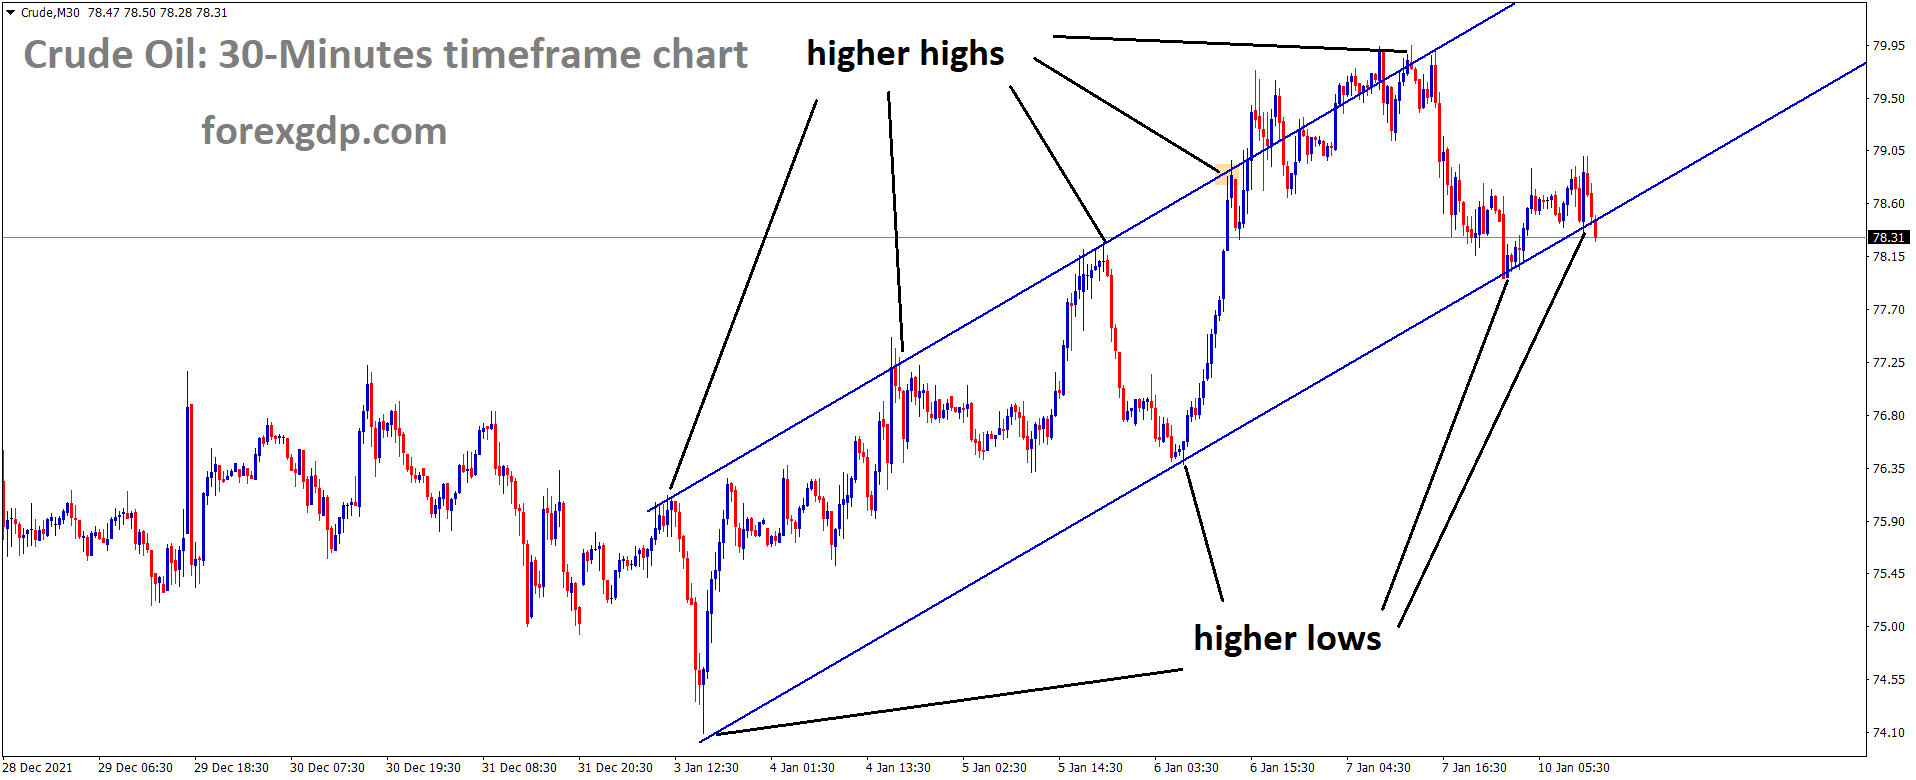 Crudeoil is moving in an Ascending channel and the market has reached the higher low area of the channel